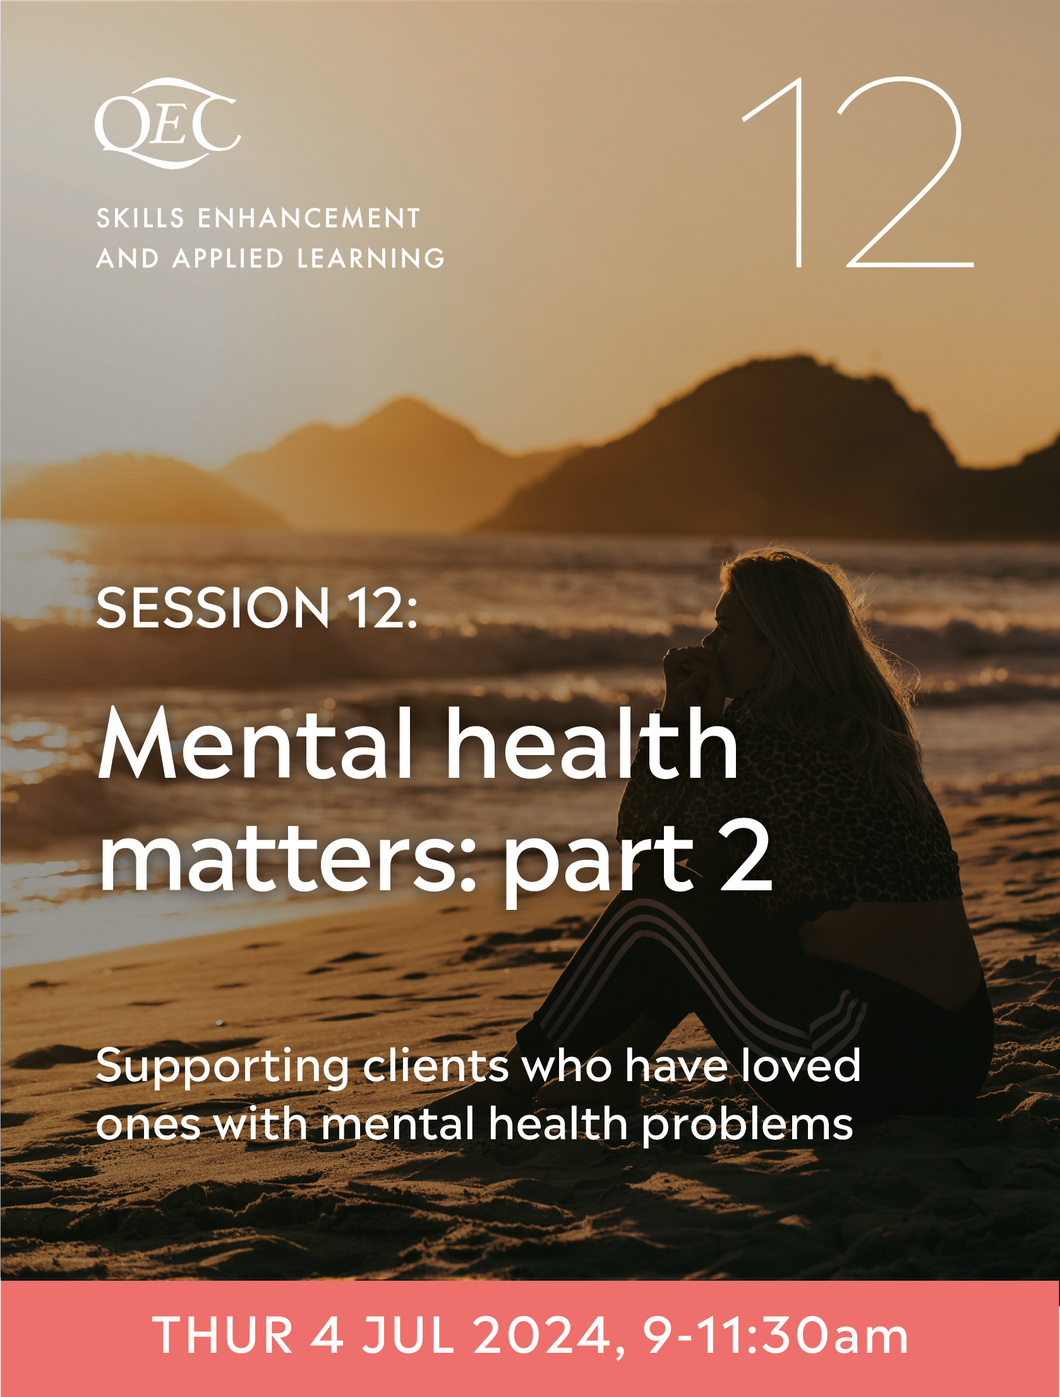 SEAL Session 12: Mental health matters part two - 4 Jul 24 (9-11.30am, UK time)